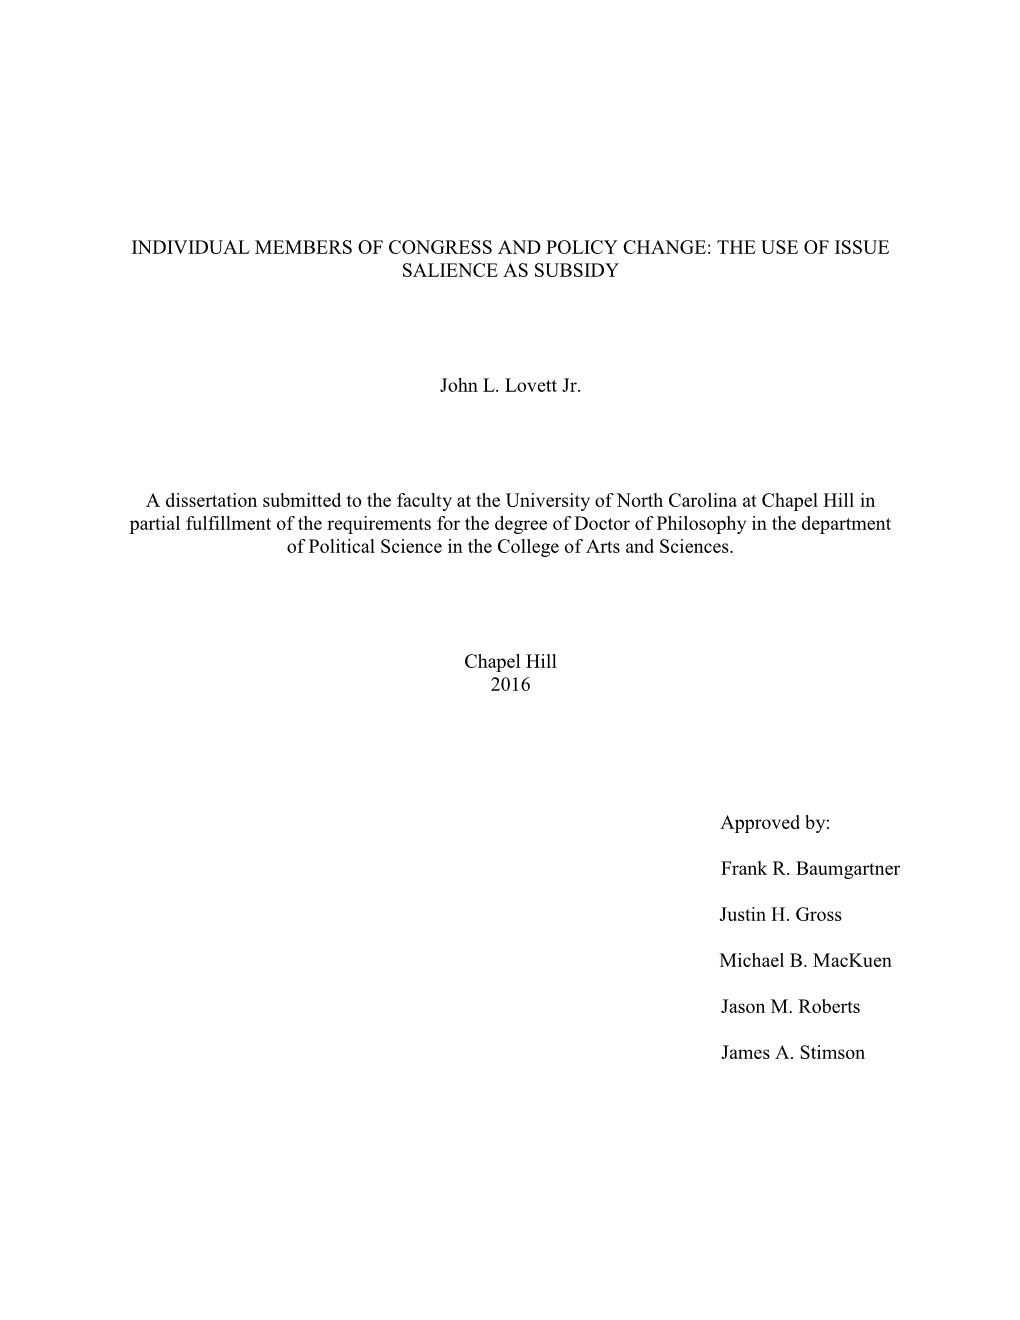 INDIVIDUAL MEMBERS of CONGRESS and POLICY CHANGE: the USE of ISSUE SALIENCE AS SUBSIDY John L. Lovett Jr. a Dissertation Submitt